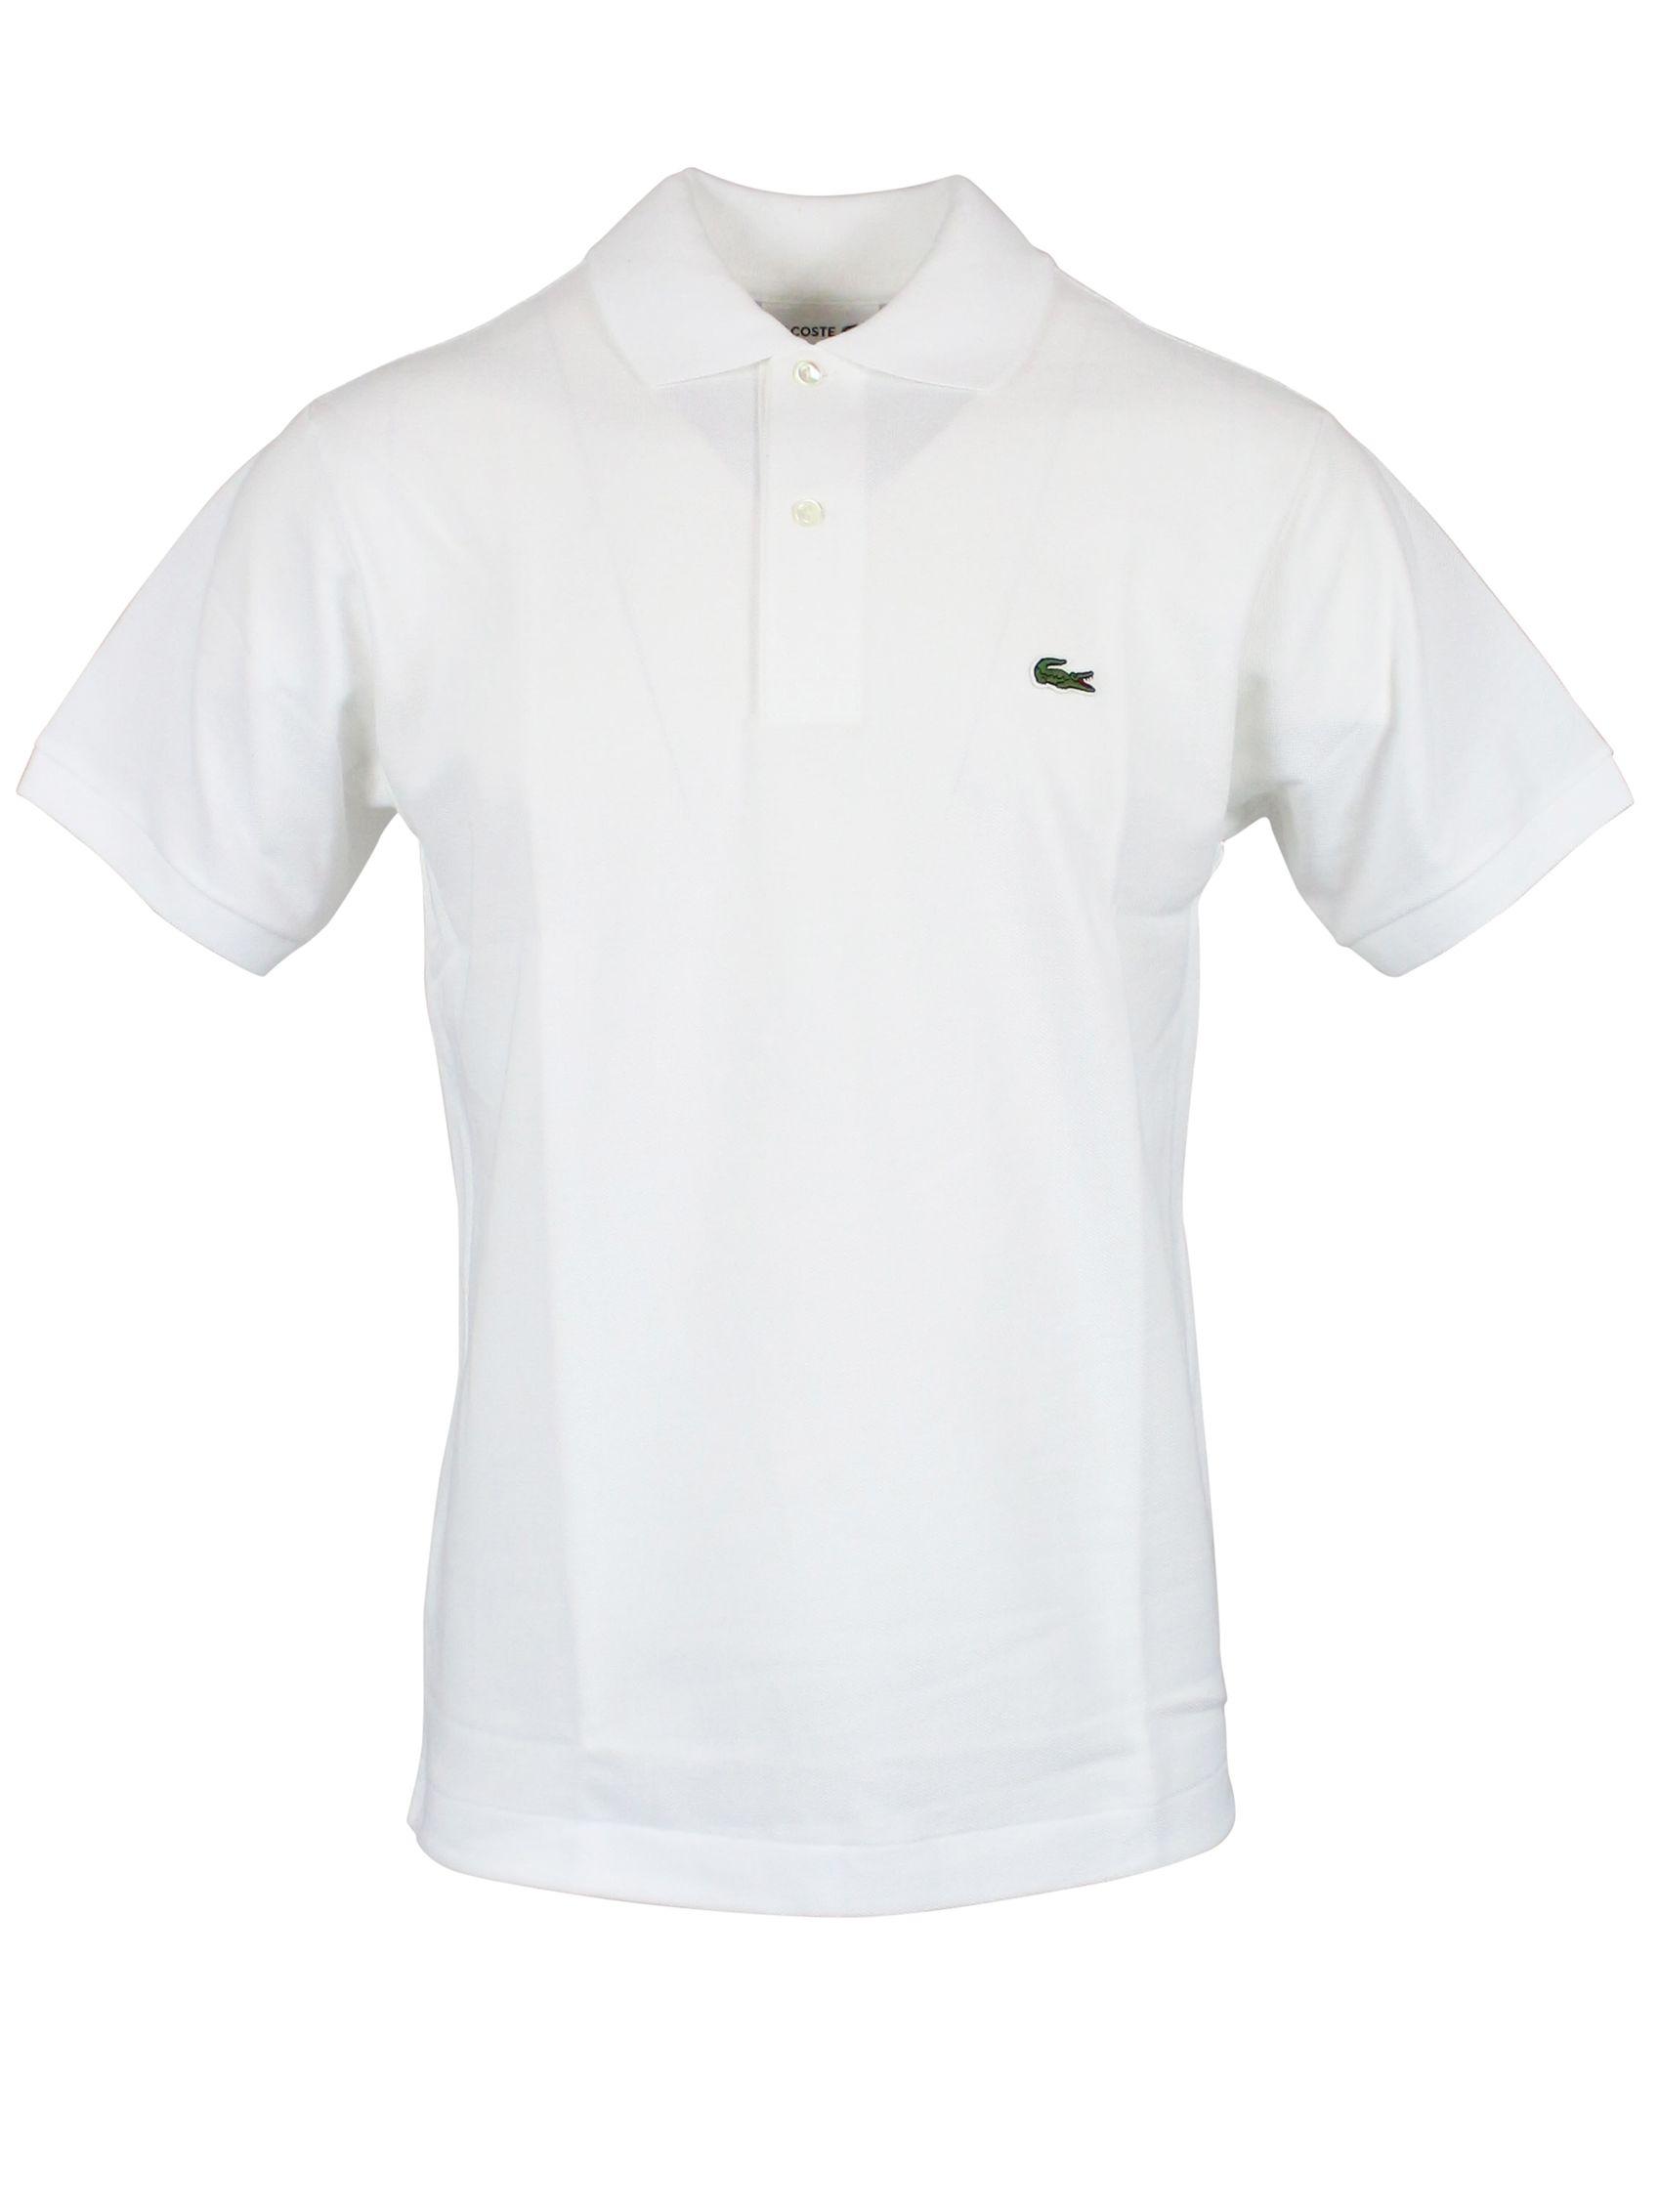 Lacoste White Cotton Polo Shirt in White for Men - Lyst